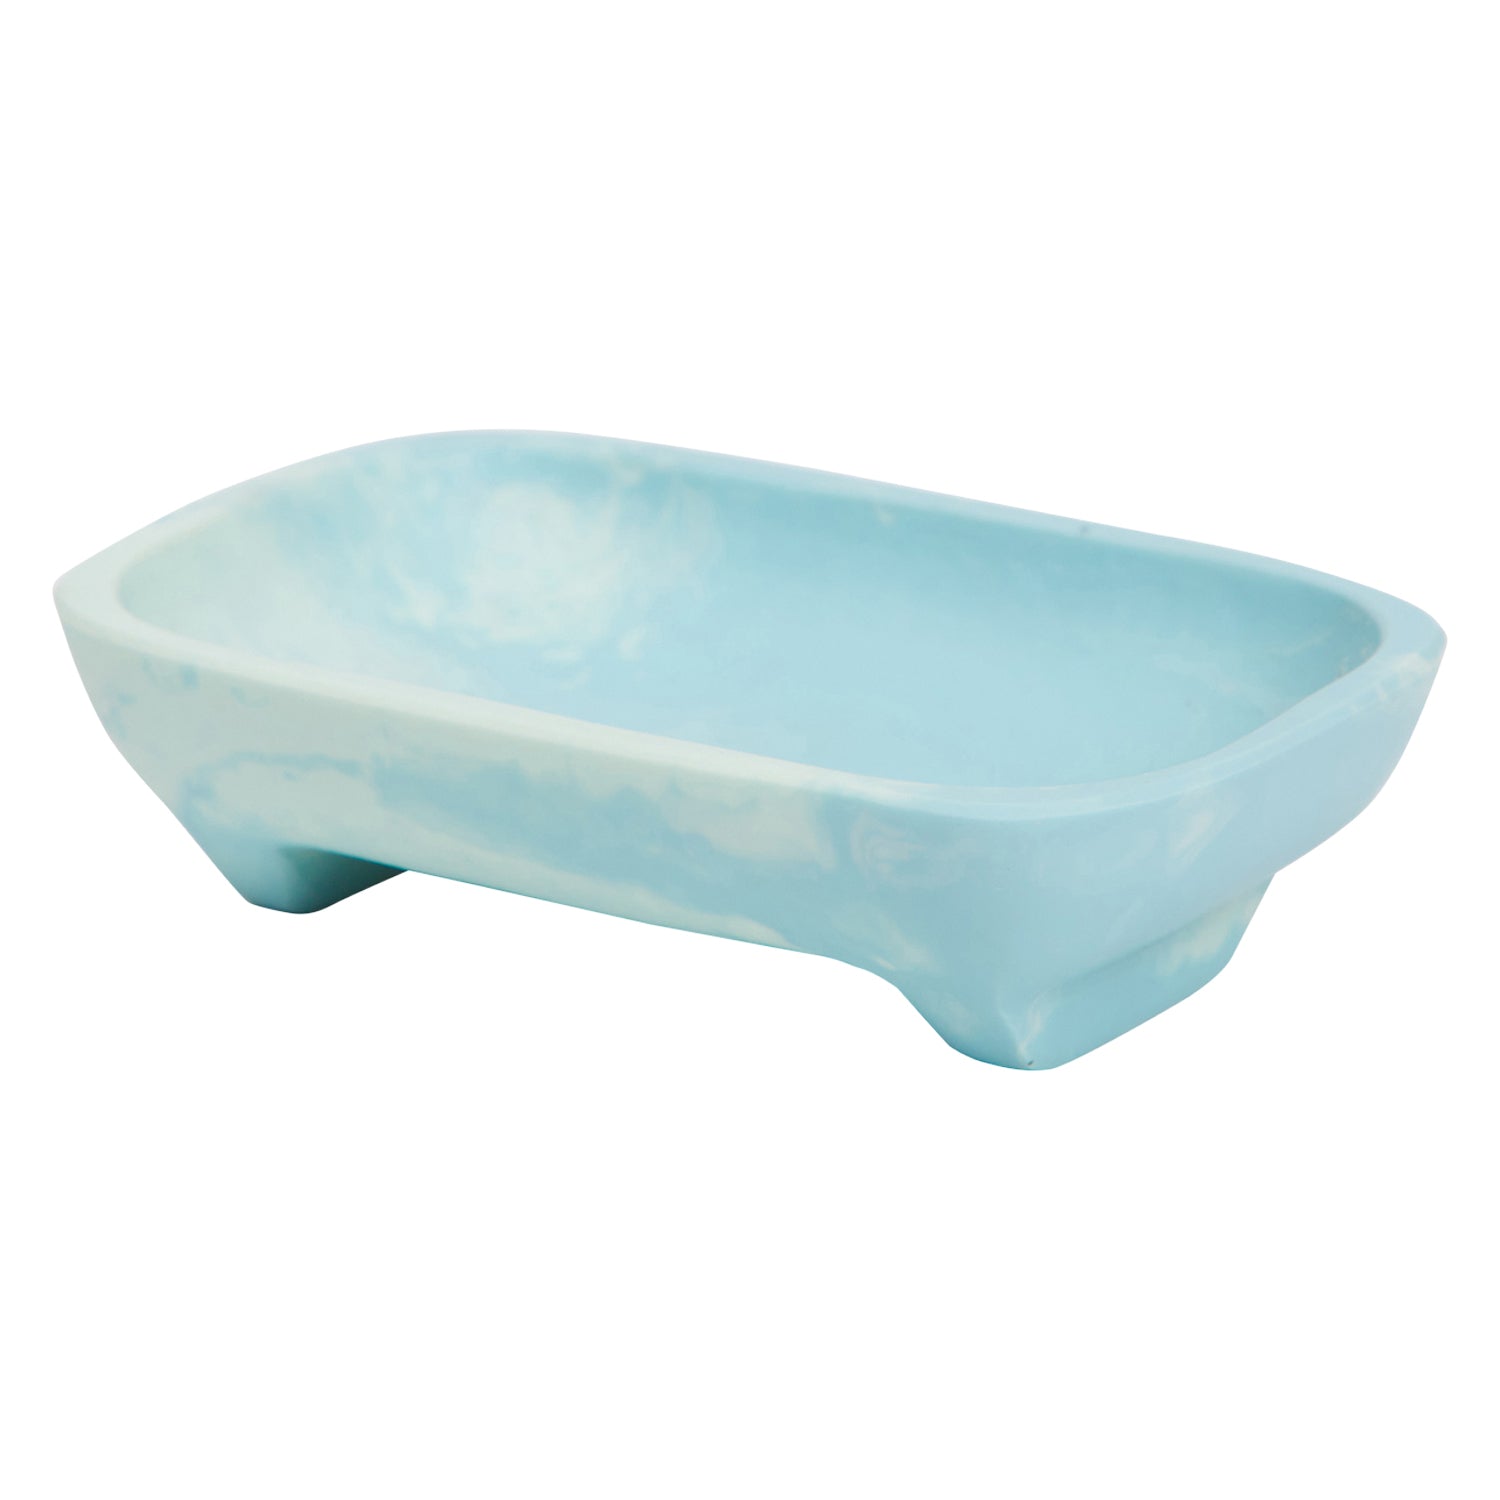 Sage and Clare - Daja Soap Dish - Spearmint